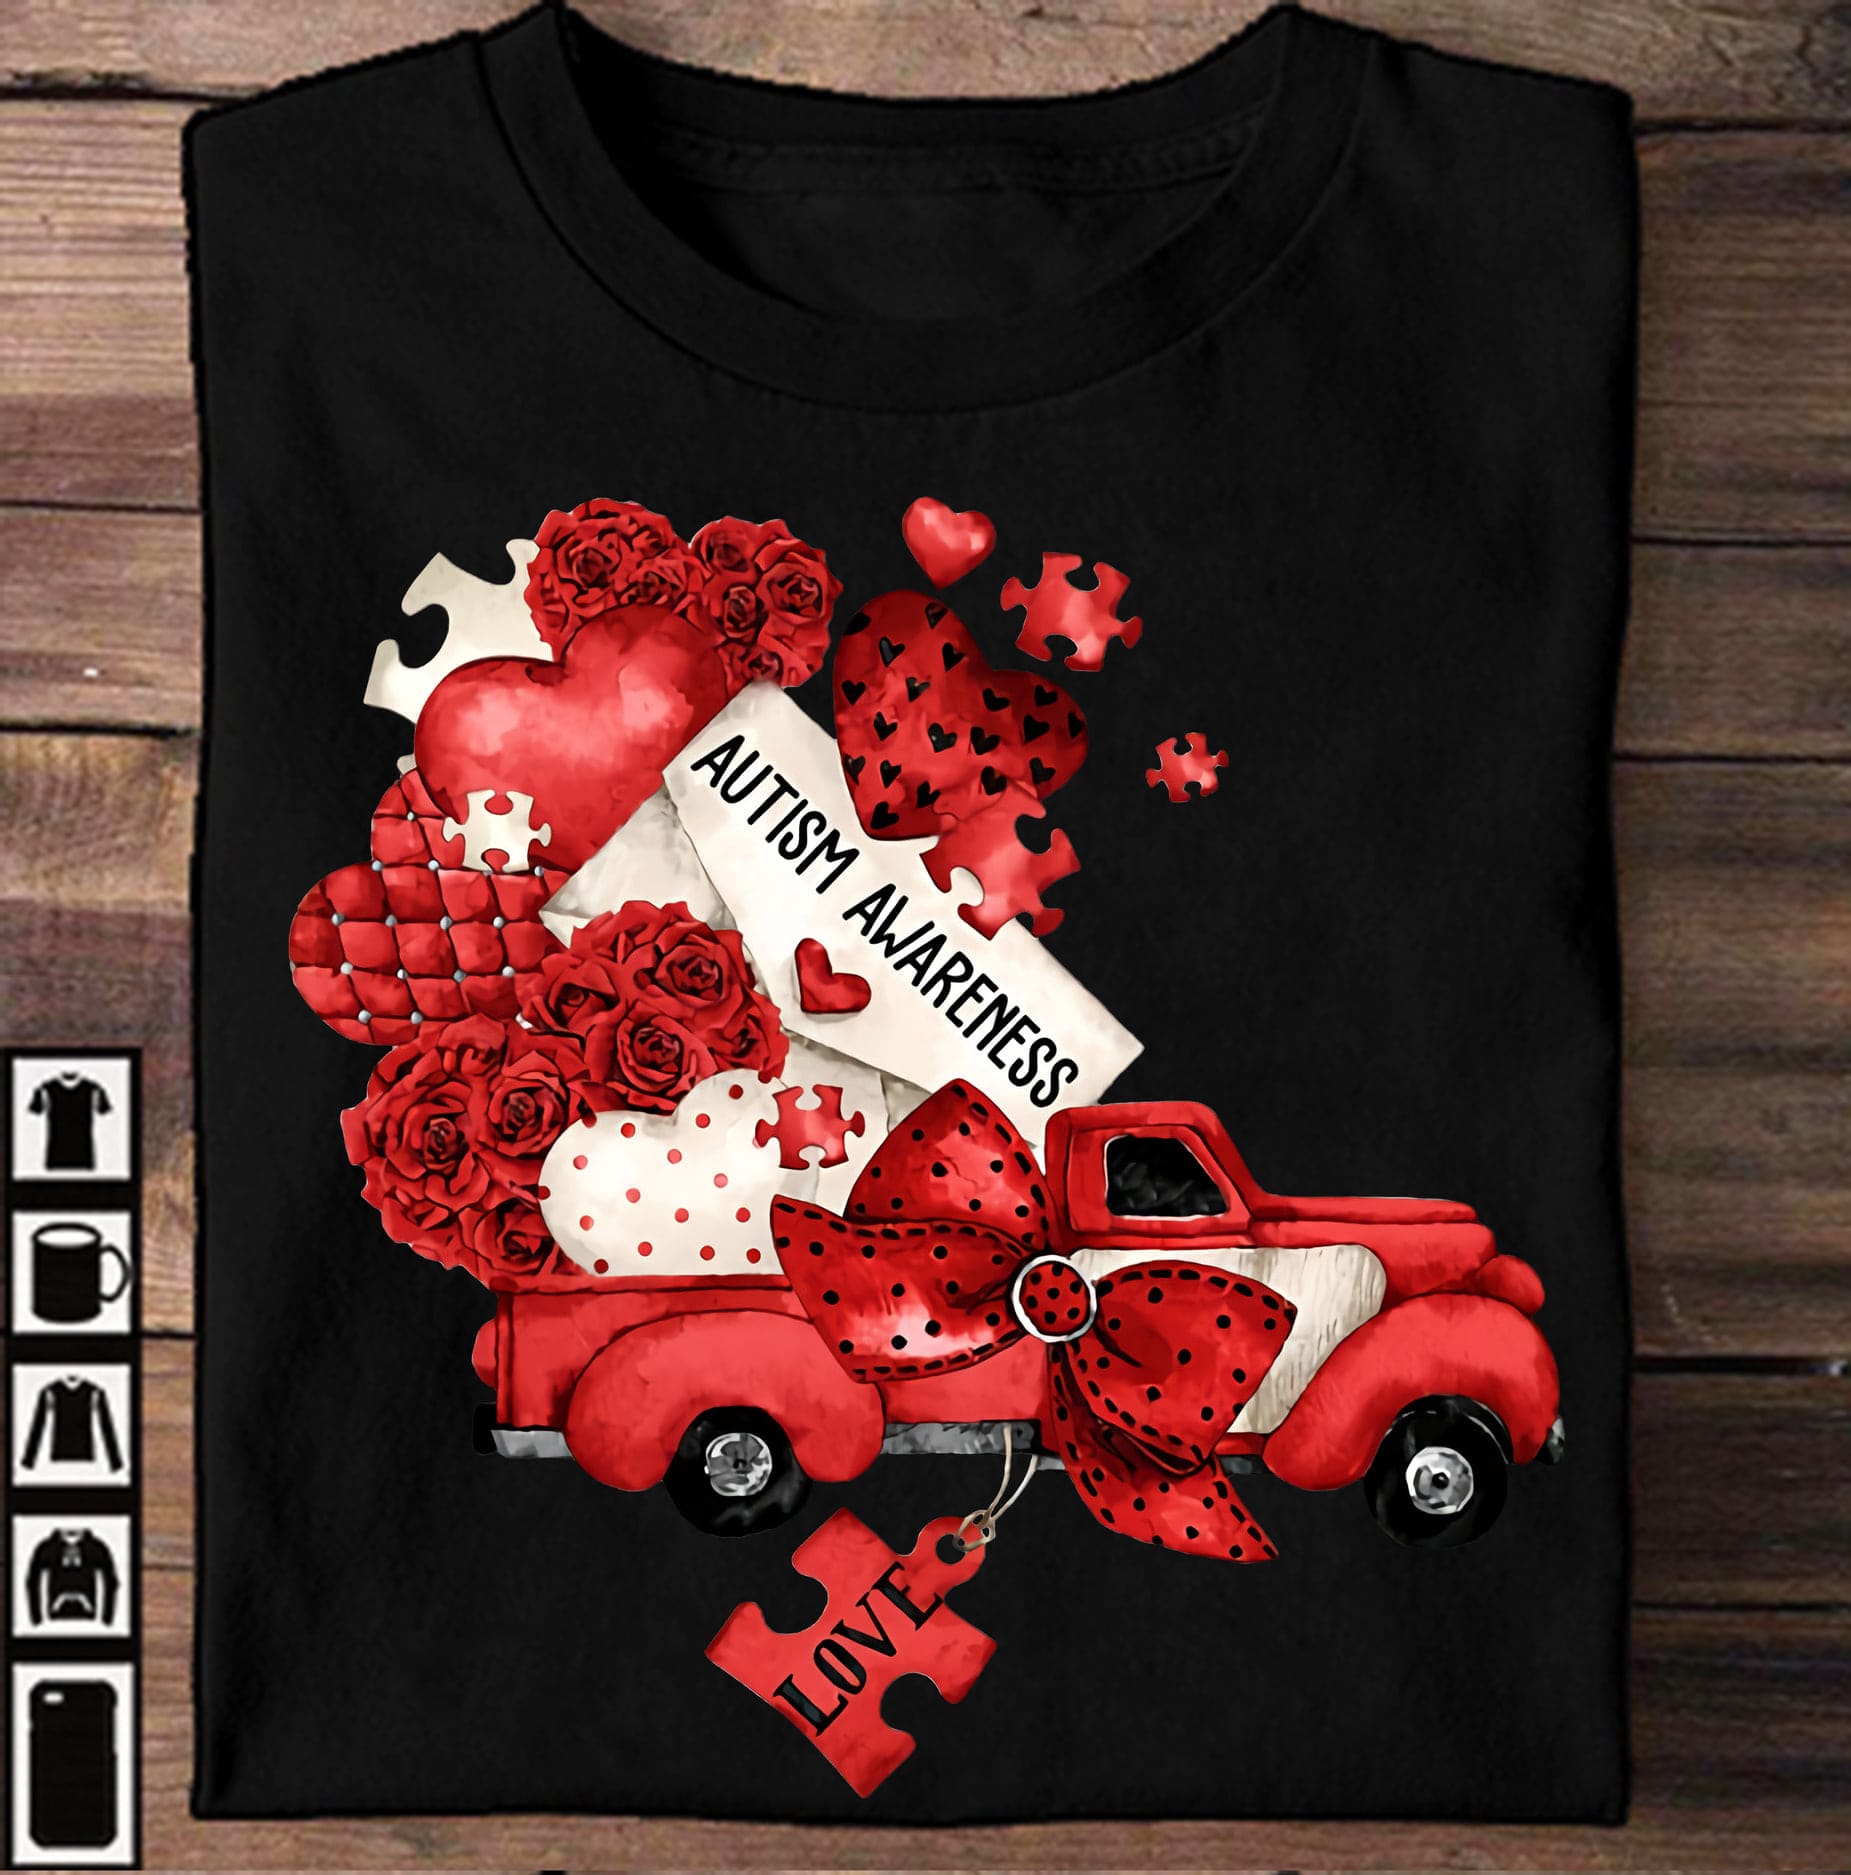 Autism awareness - Heart on red truck, be patient with autism